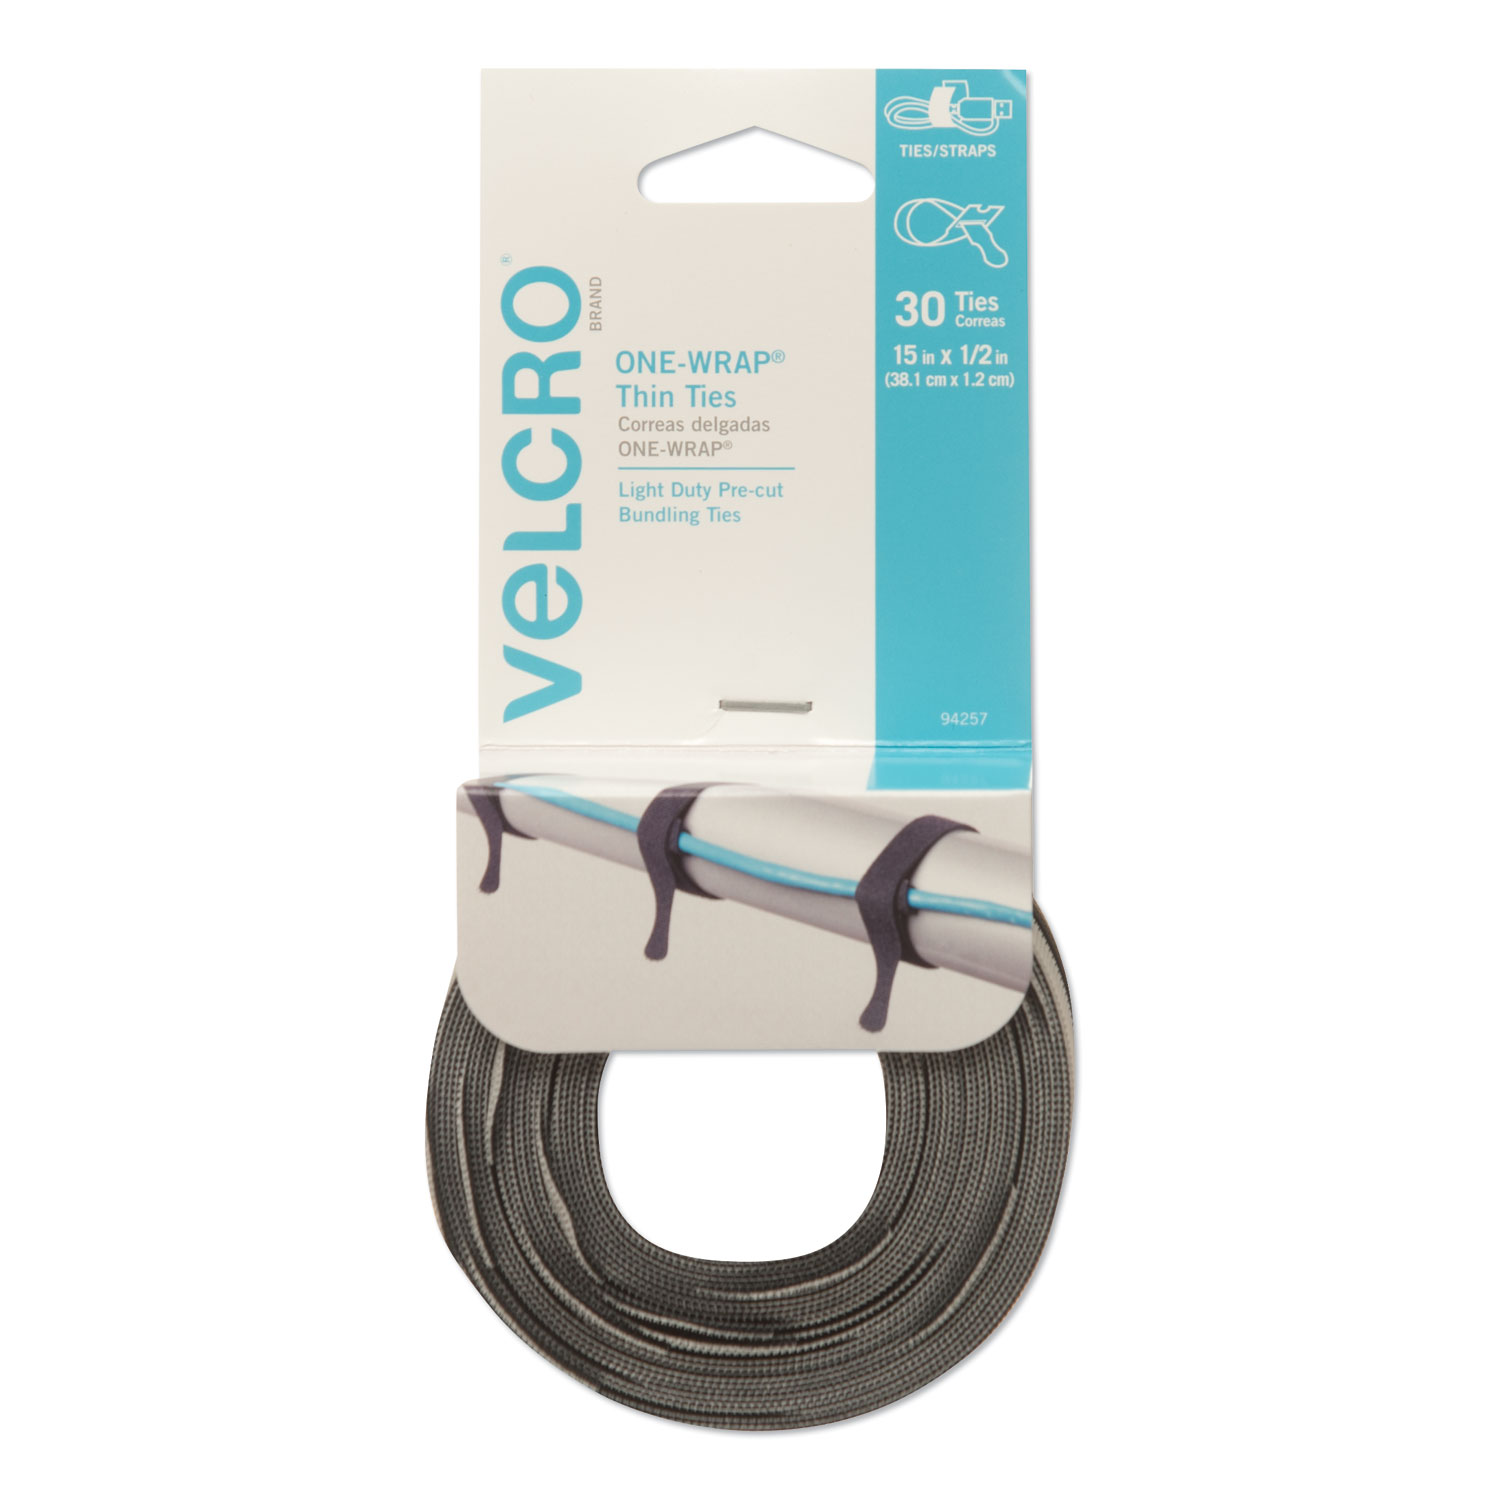  VELCRO Brand Sticky Back Tape, Beige, 15 Ft Roll, Cut to  Length Hook and Loop Strips with Adhesive